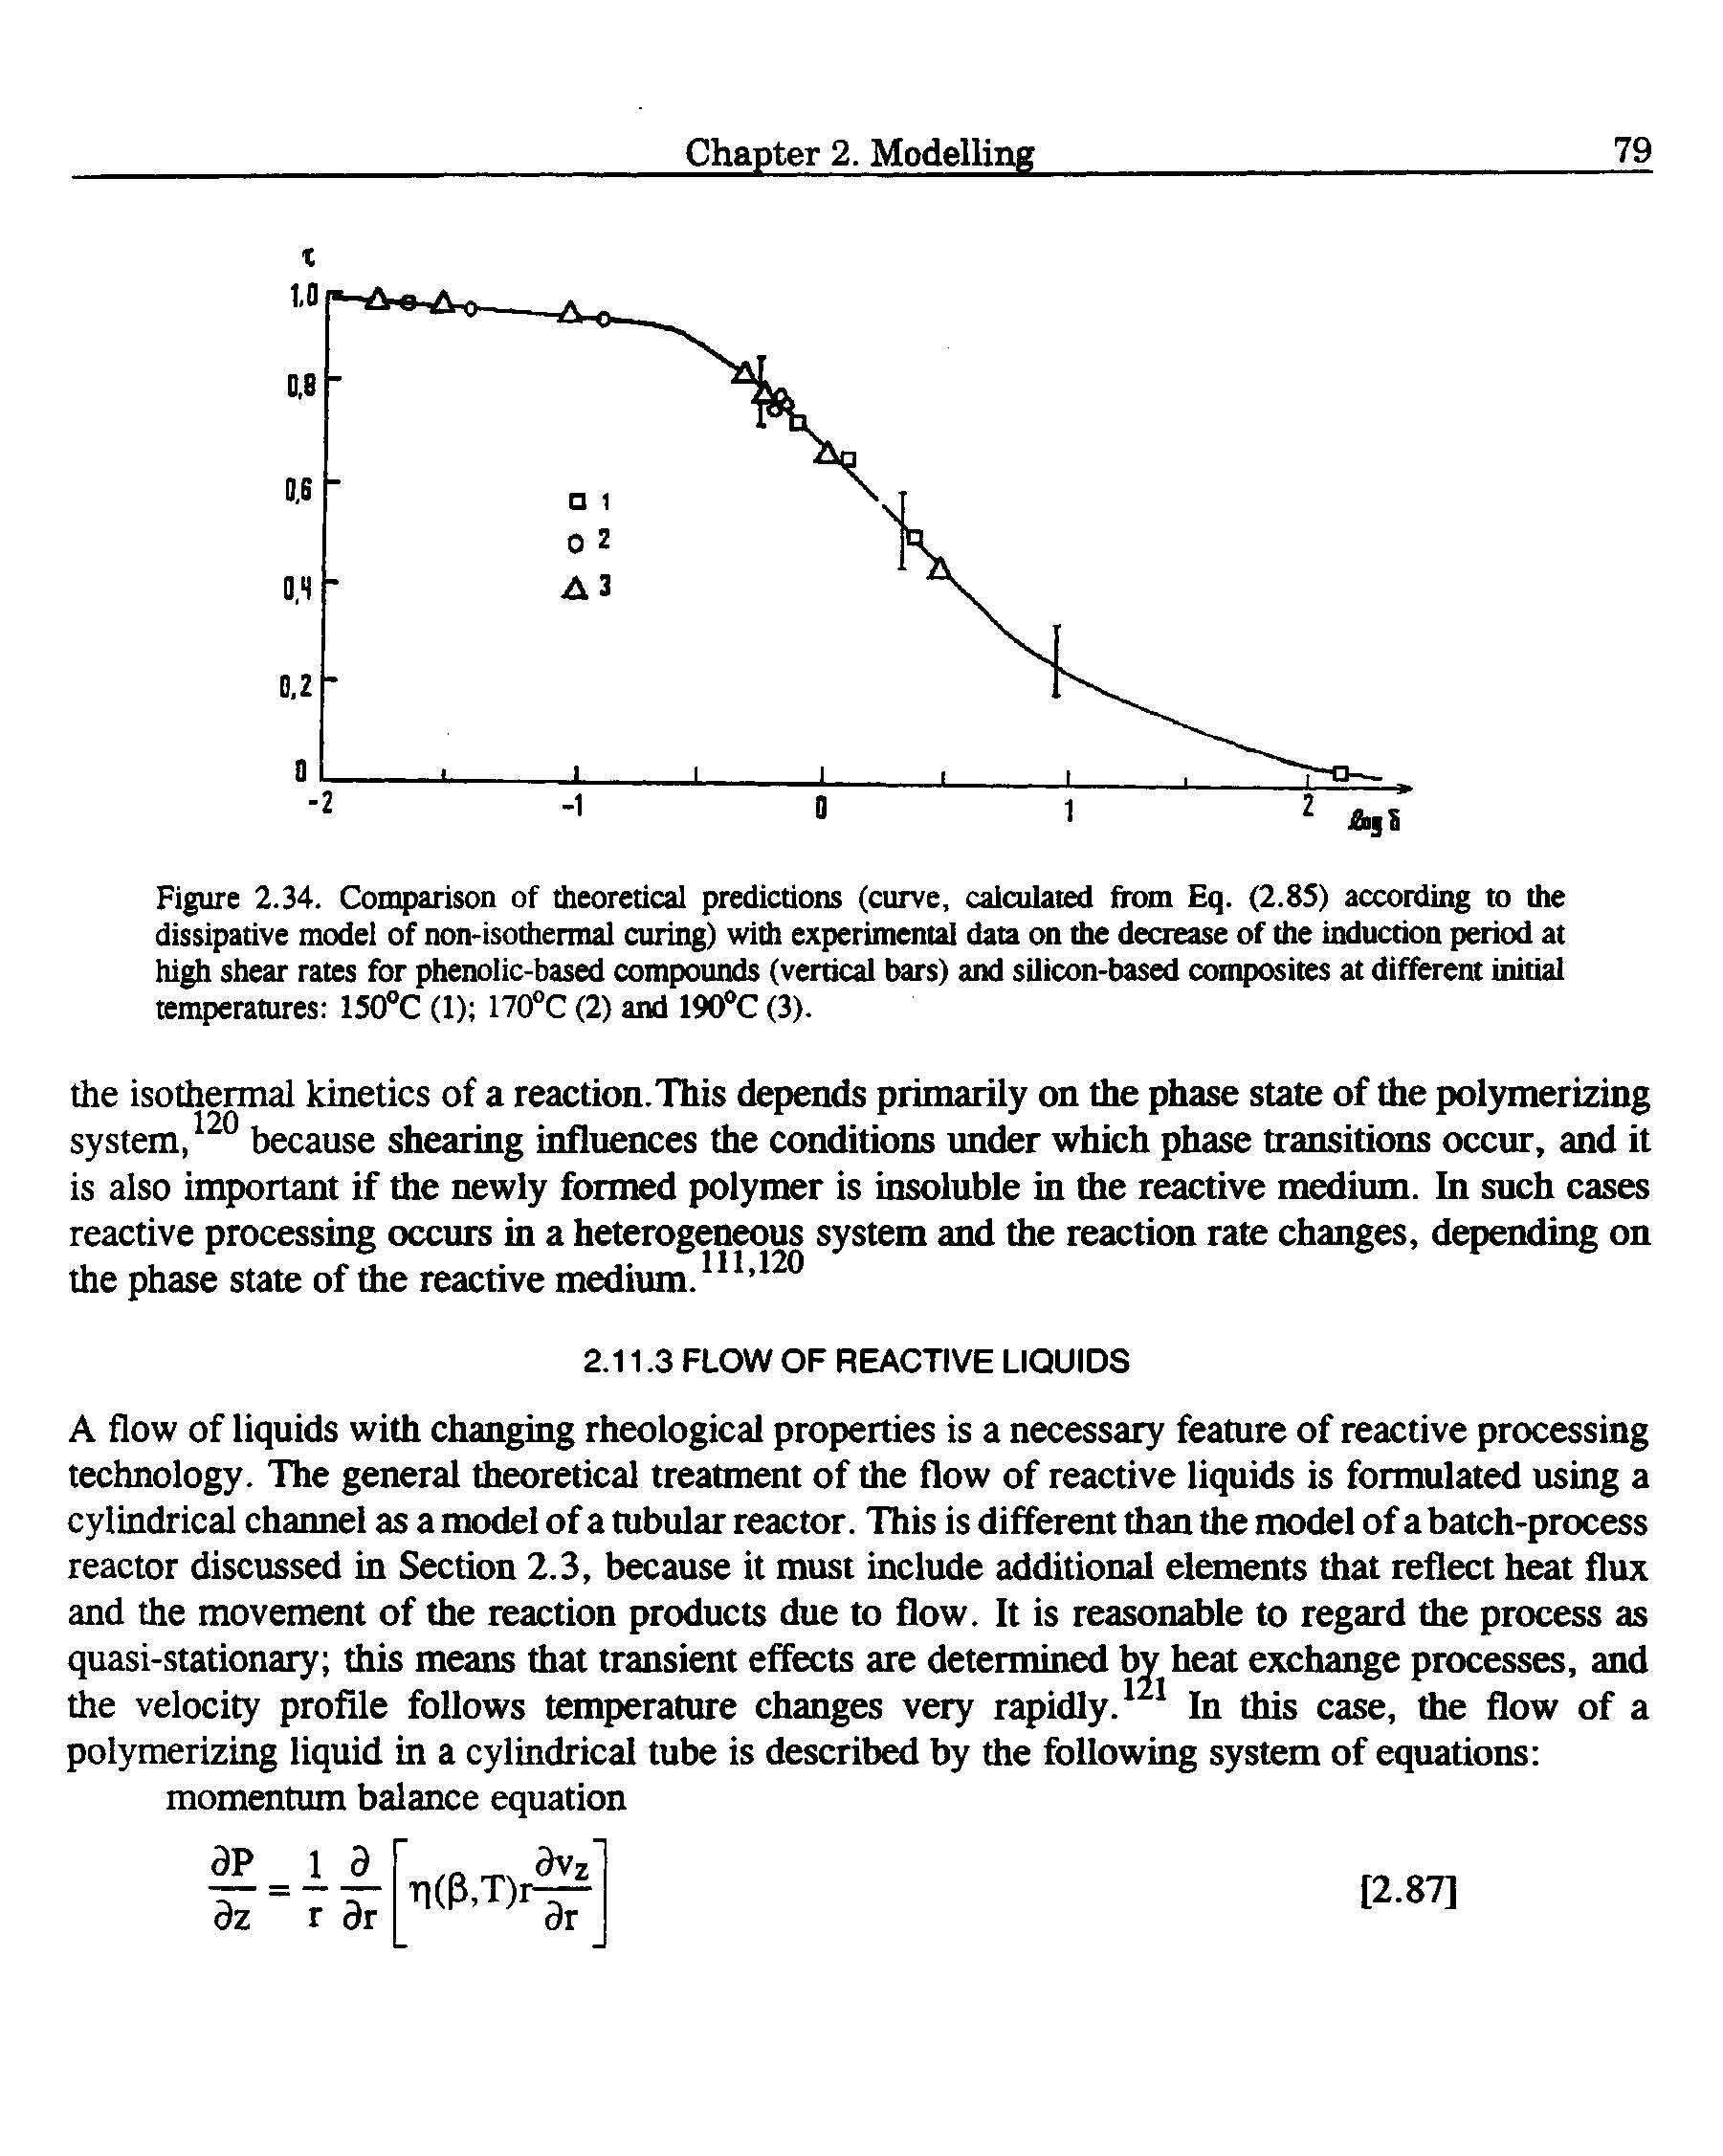 Figure 2.34. Comparison of theoretical predictions (curve, calculated from Eq. (2.8S) according to the dissipative model of non-isothermal curing) with experimental data on the decrease of the induction period at high shear rates for phenolic-based compounds (vertical bars) and silicon-based composites at different initial temperatures 150°C (1) 170°C (2) and 190°C (3).